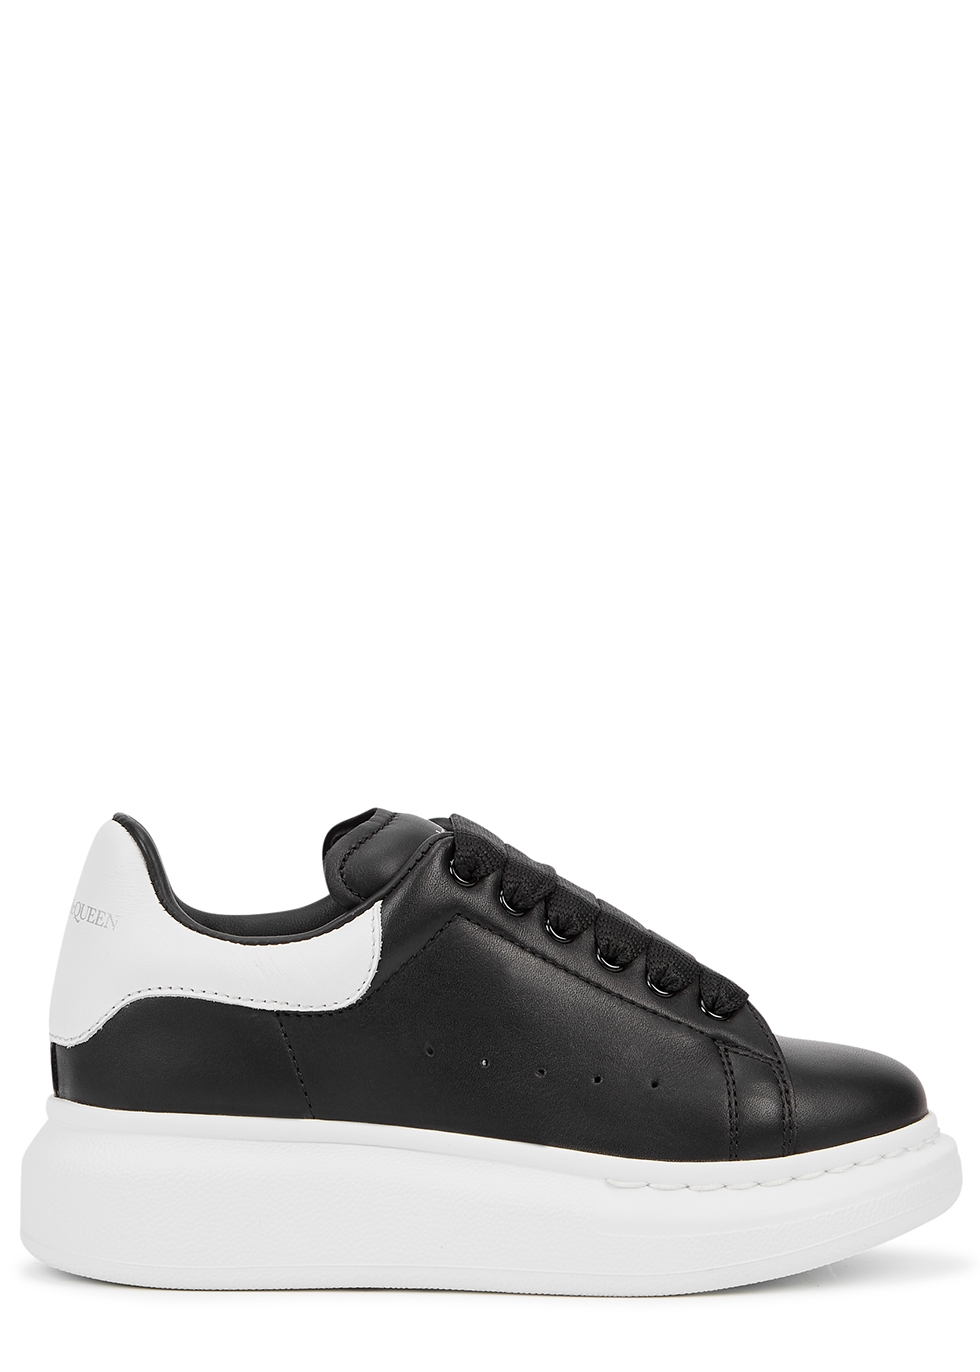 KIDS Oversized black leather sneakers